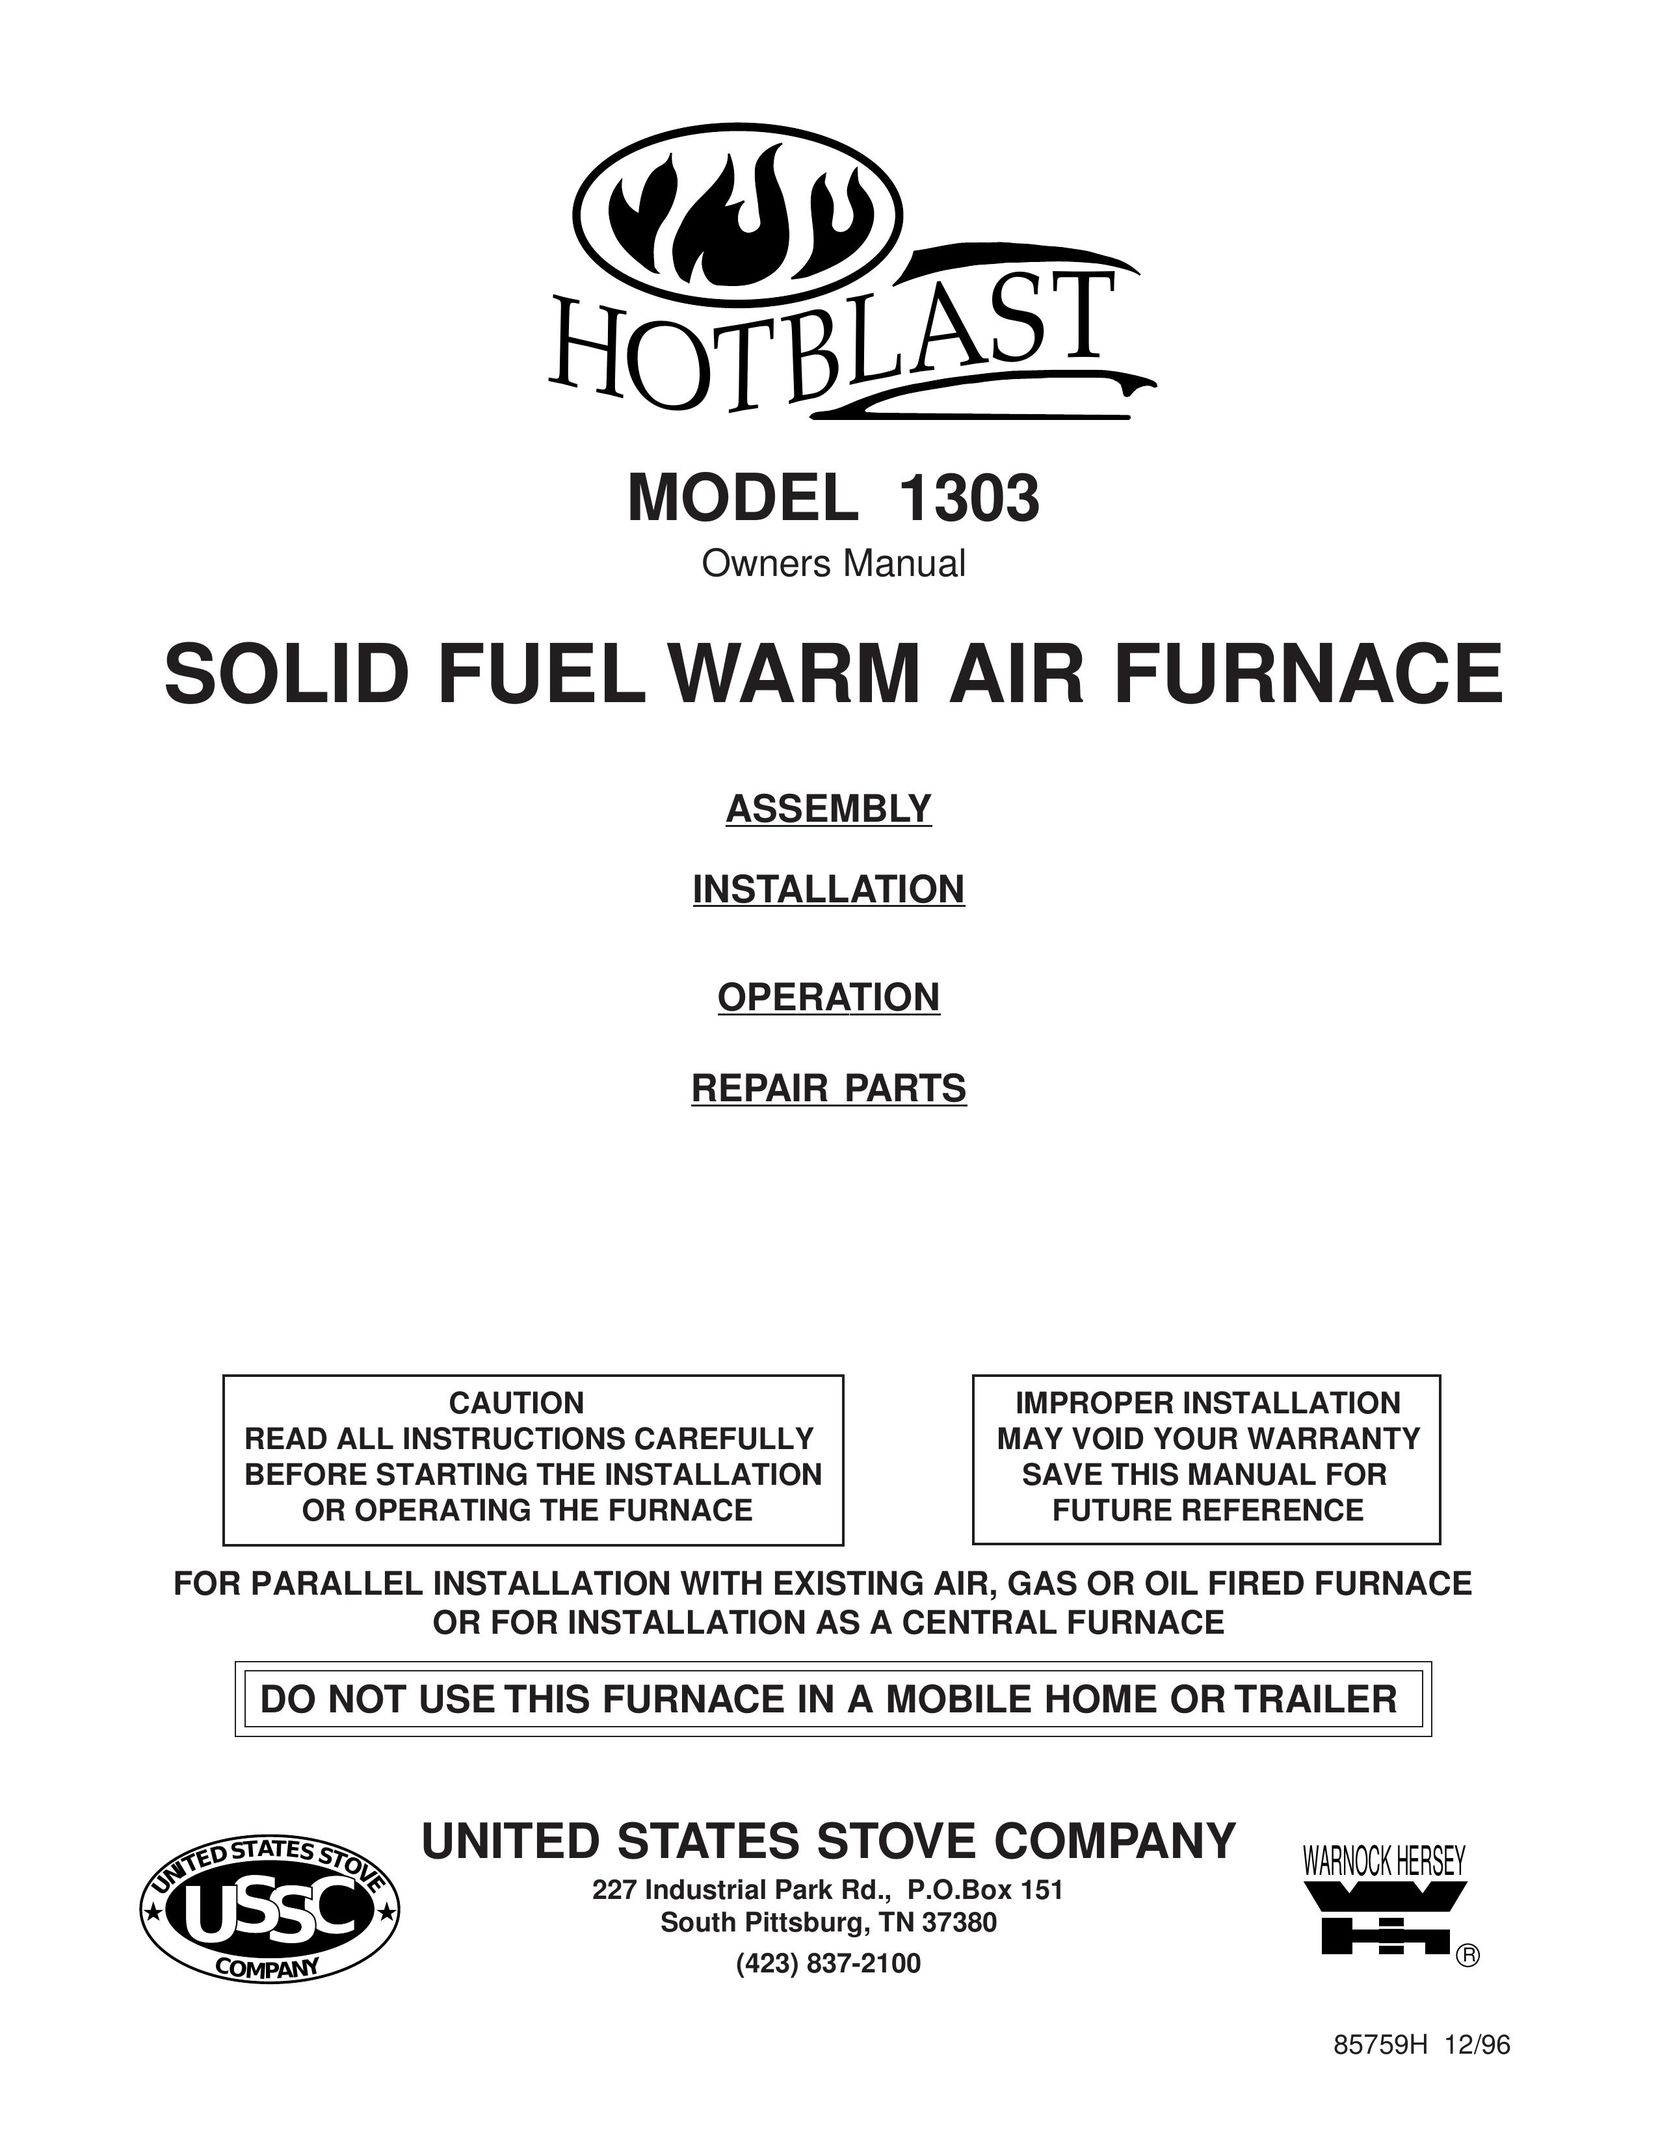 United States Stove AIR Furnace User Manual